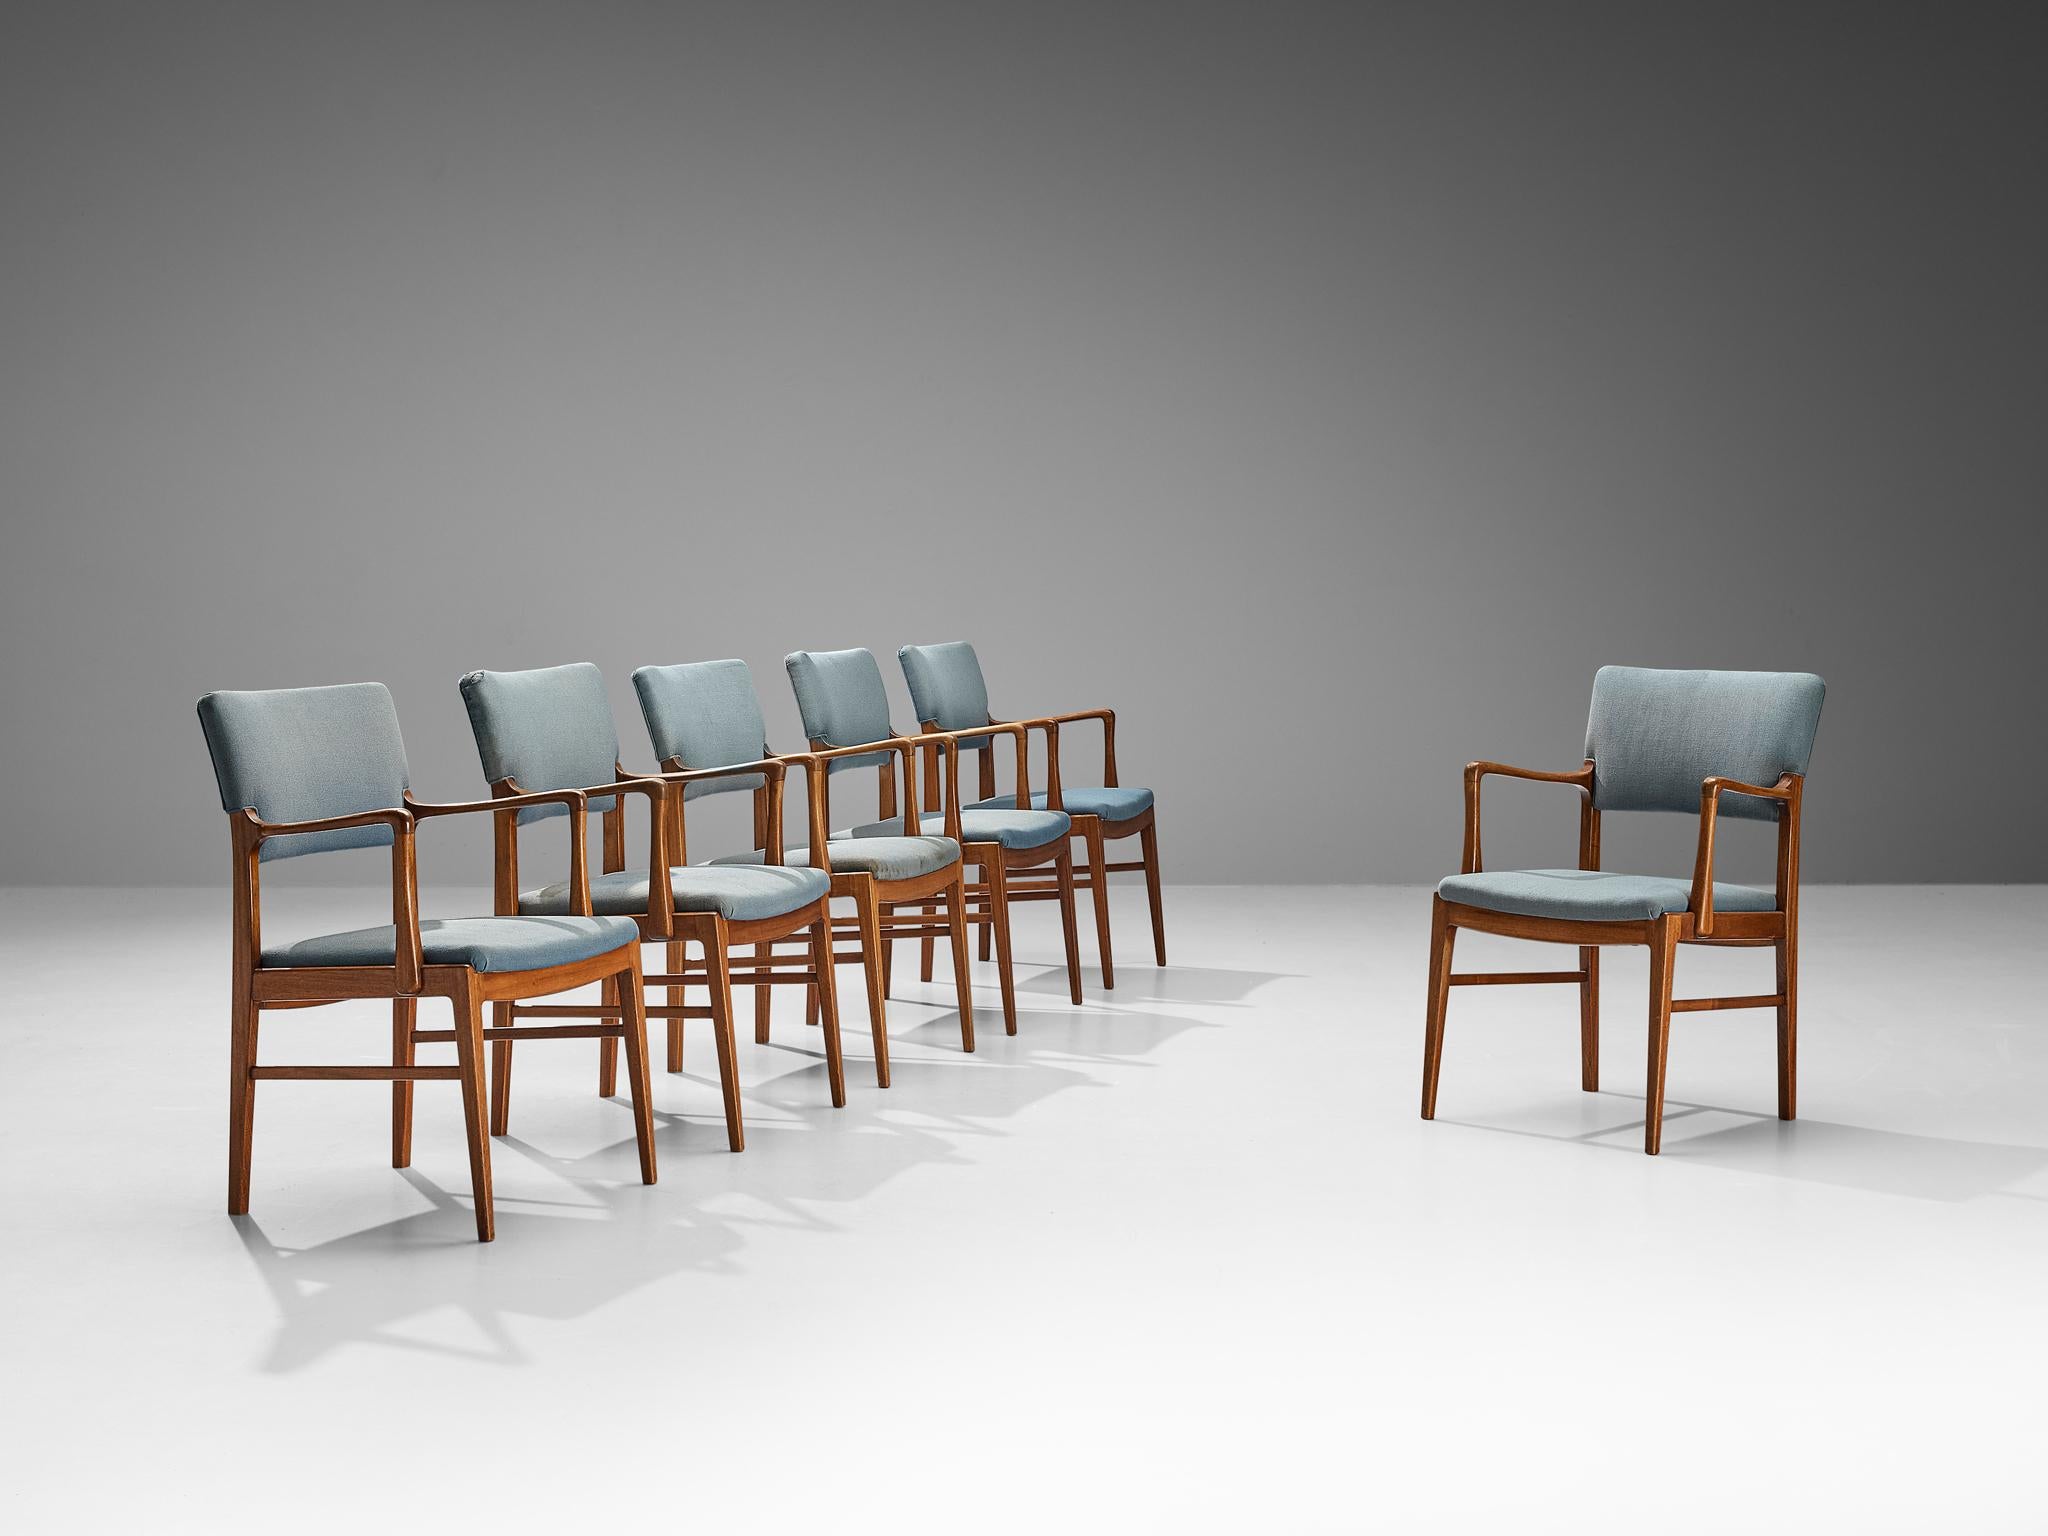 Set of six armchairs, fabric, mahogany, Denmark, 1960s

This set of six dining chairs of Danish origin is characterized by excellent craftsmanship and elegant silhouettes. The frame has an organic appearance due to the subtle curves in the armrests,